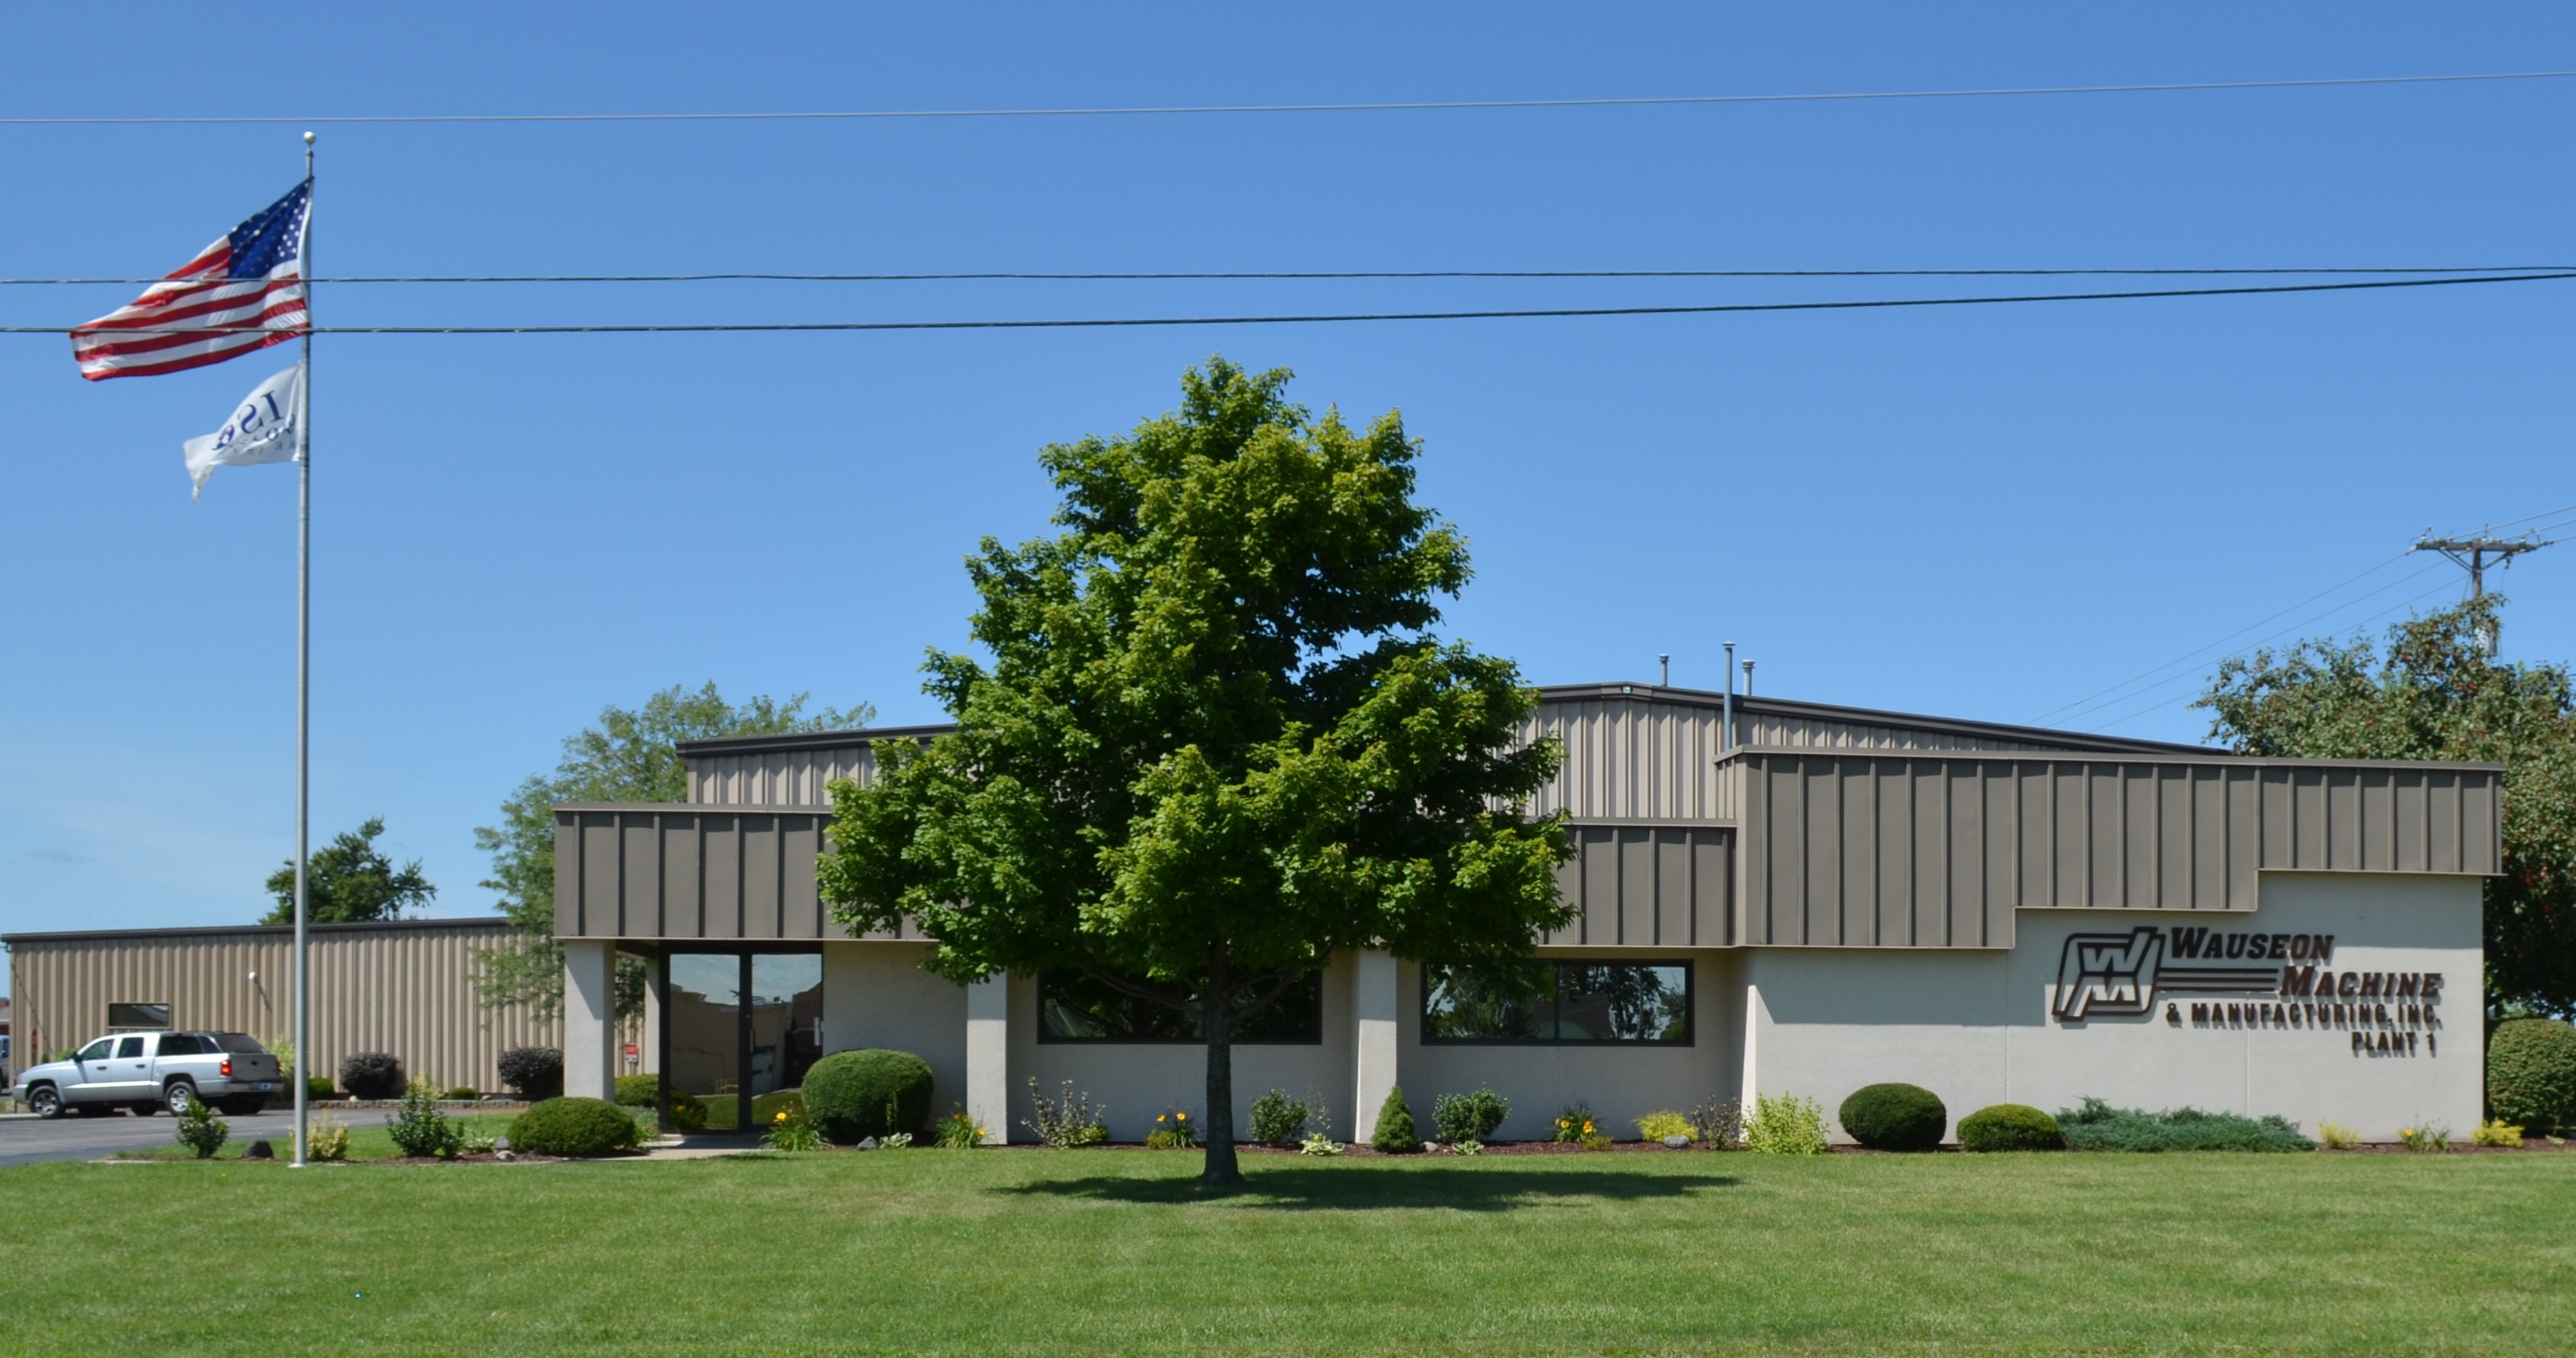 Wauseon Machine and Manufacturing headquarters in Wauseon, Ohio